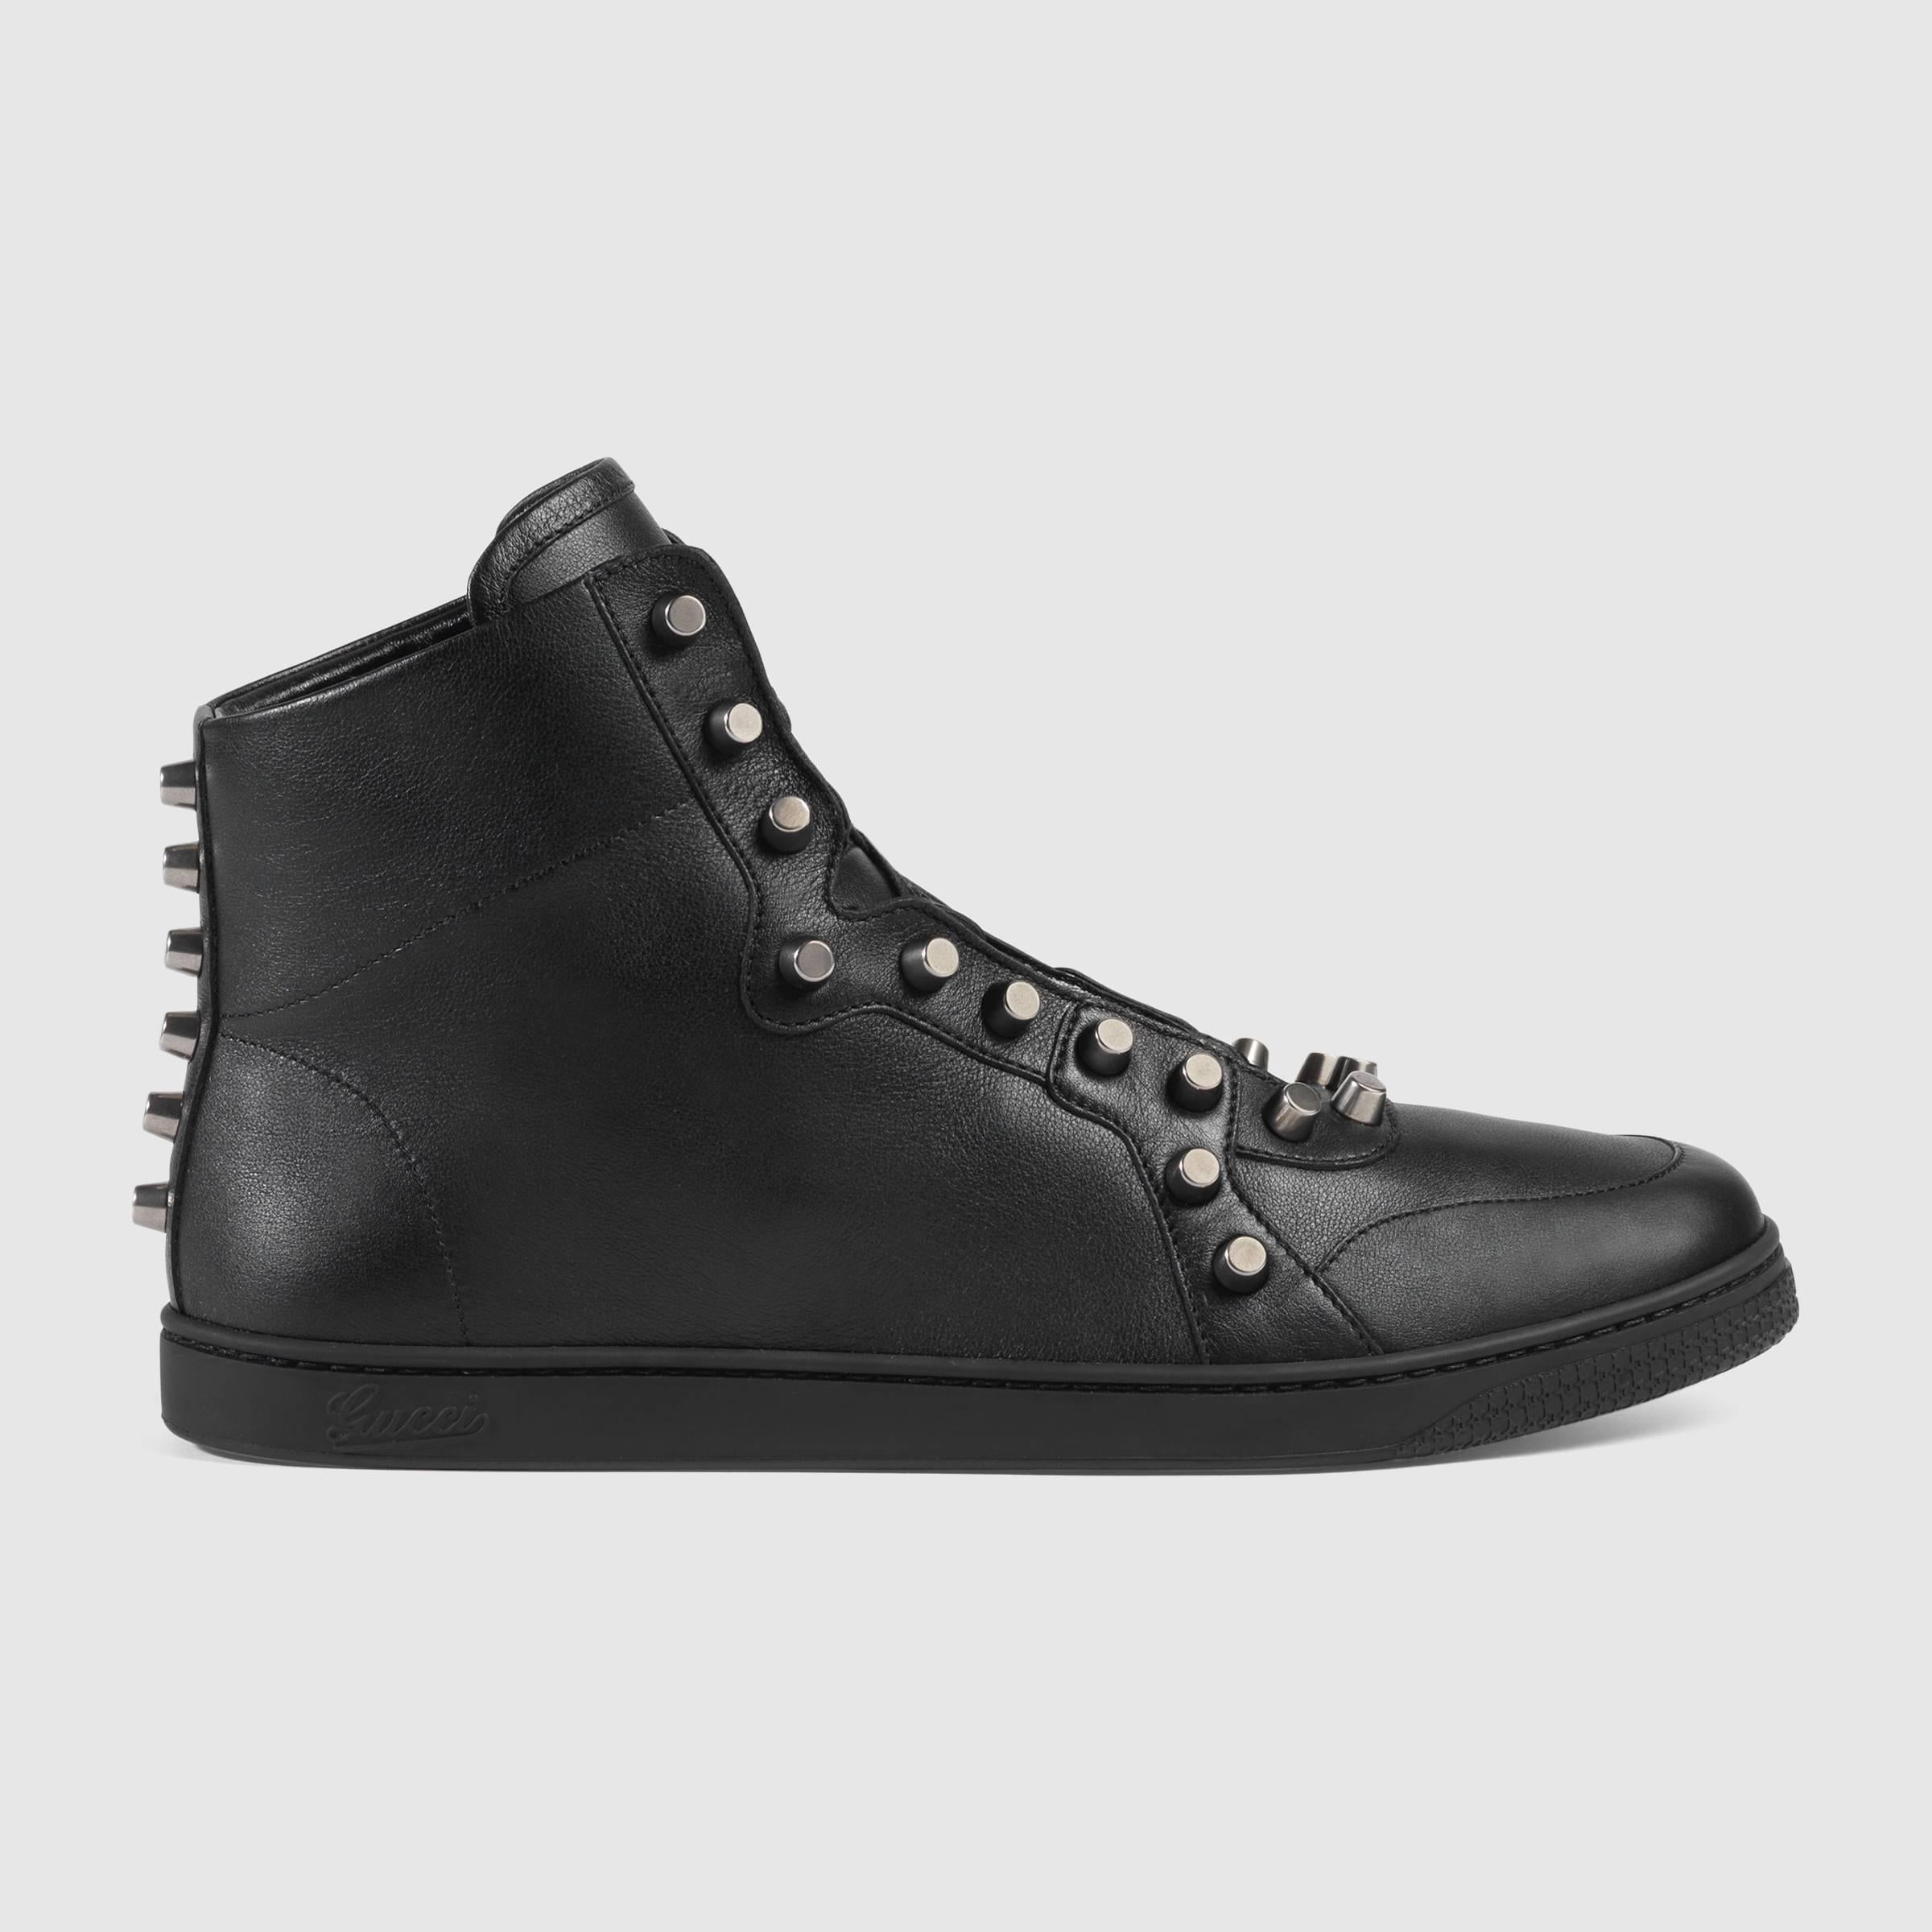 New Gucci Men's Leather Black High-Top Sneakers with Studs sizes G 7, 8 / US 8 9 For Sale 1